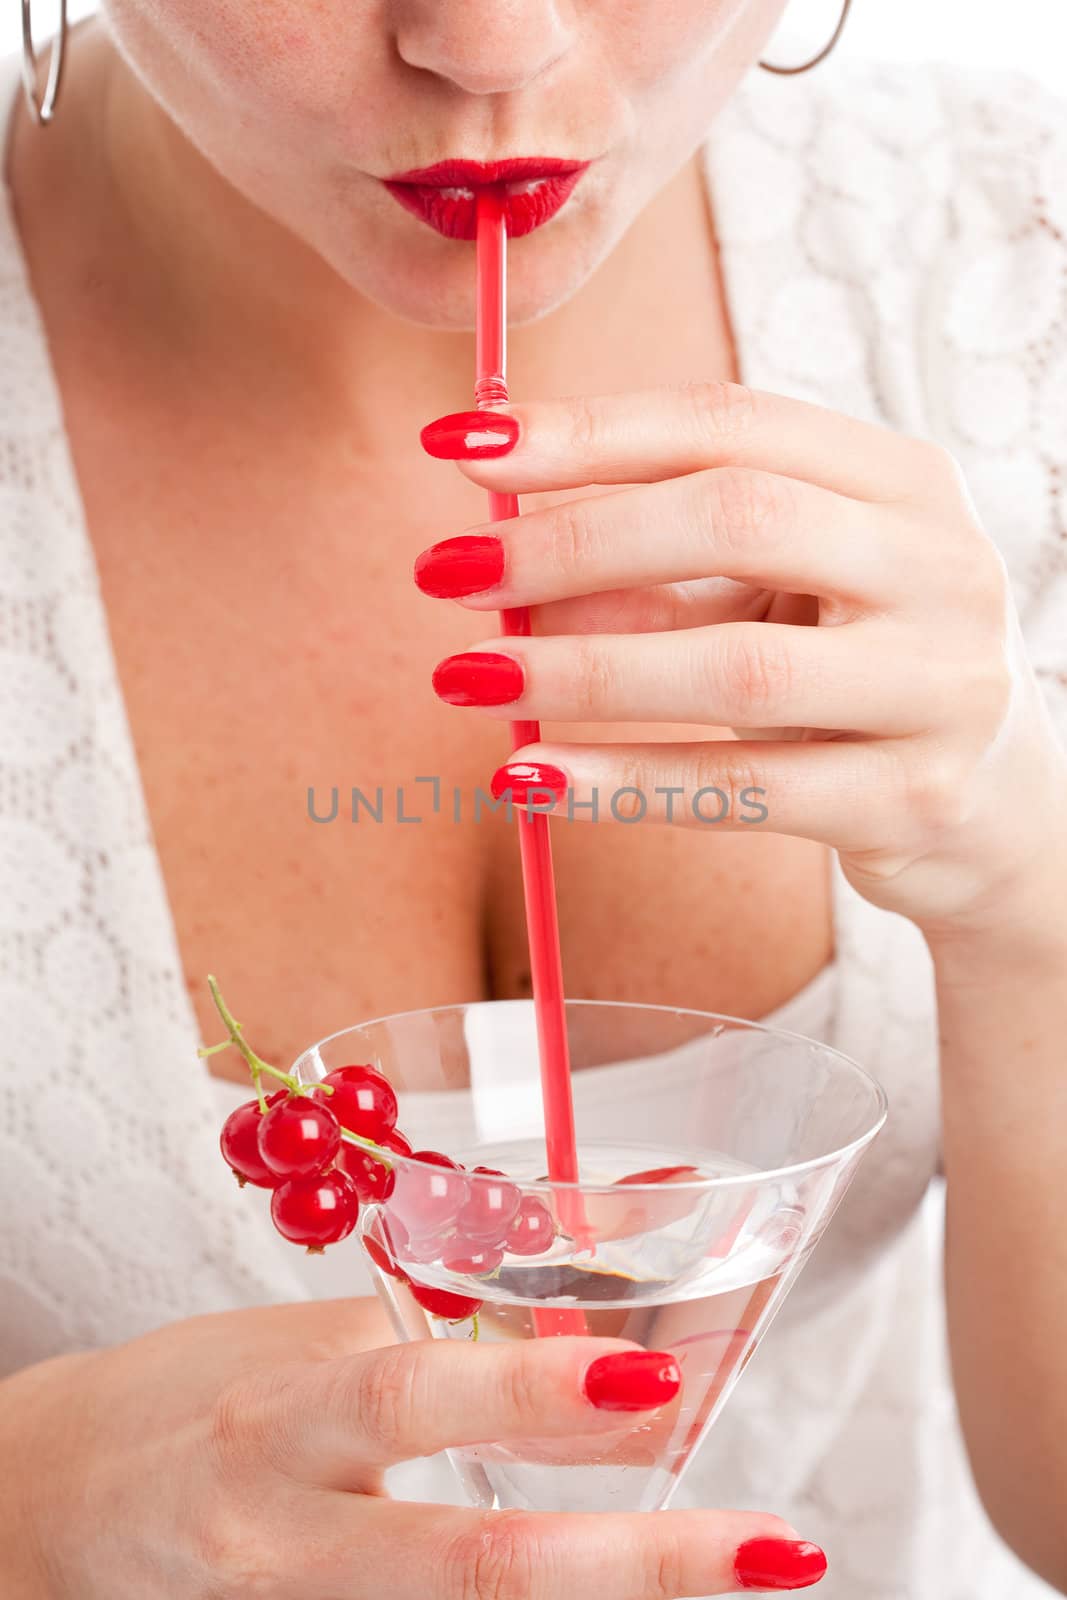 Pretty woman drinking out of her cocktailglass with a red straw